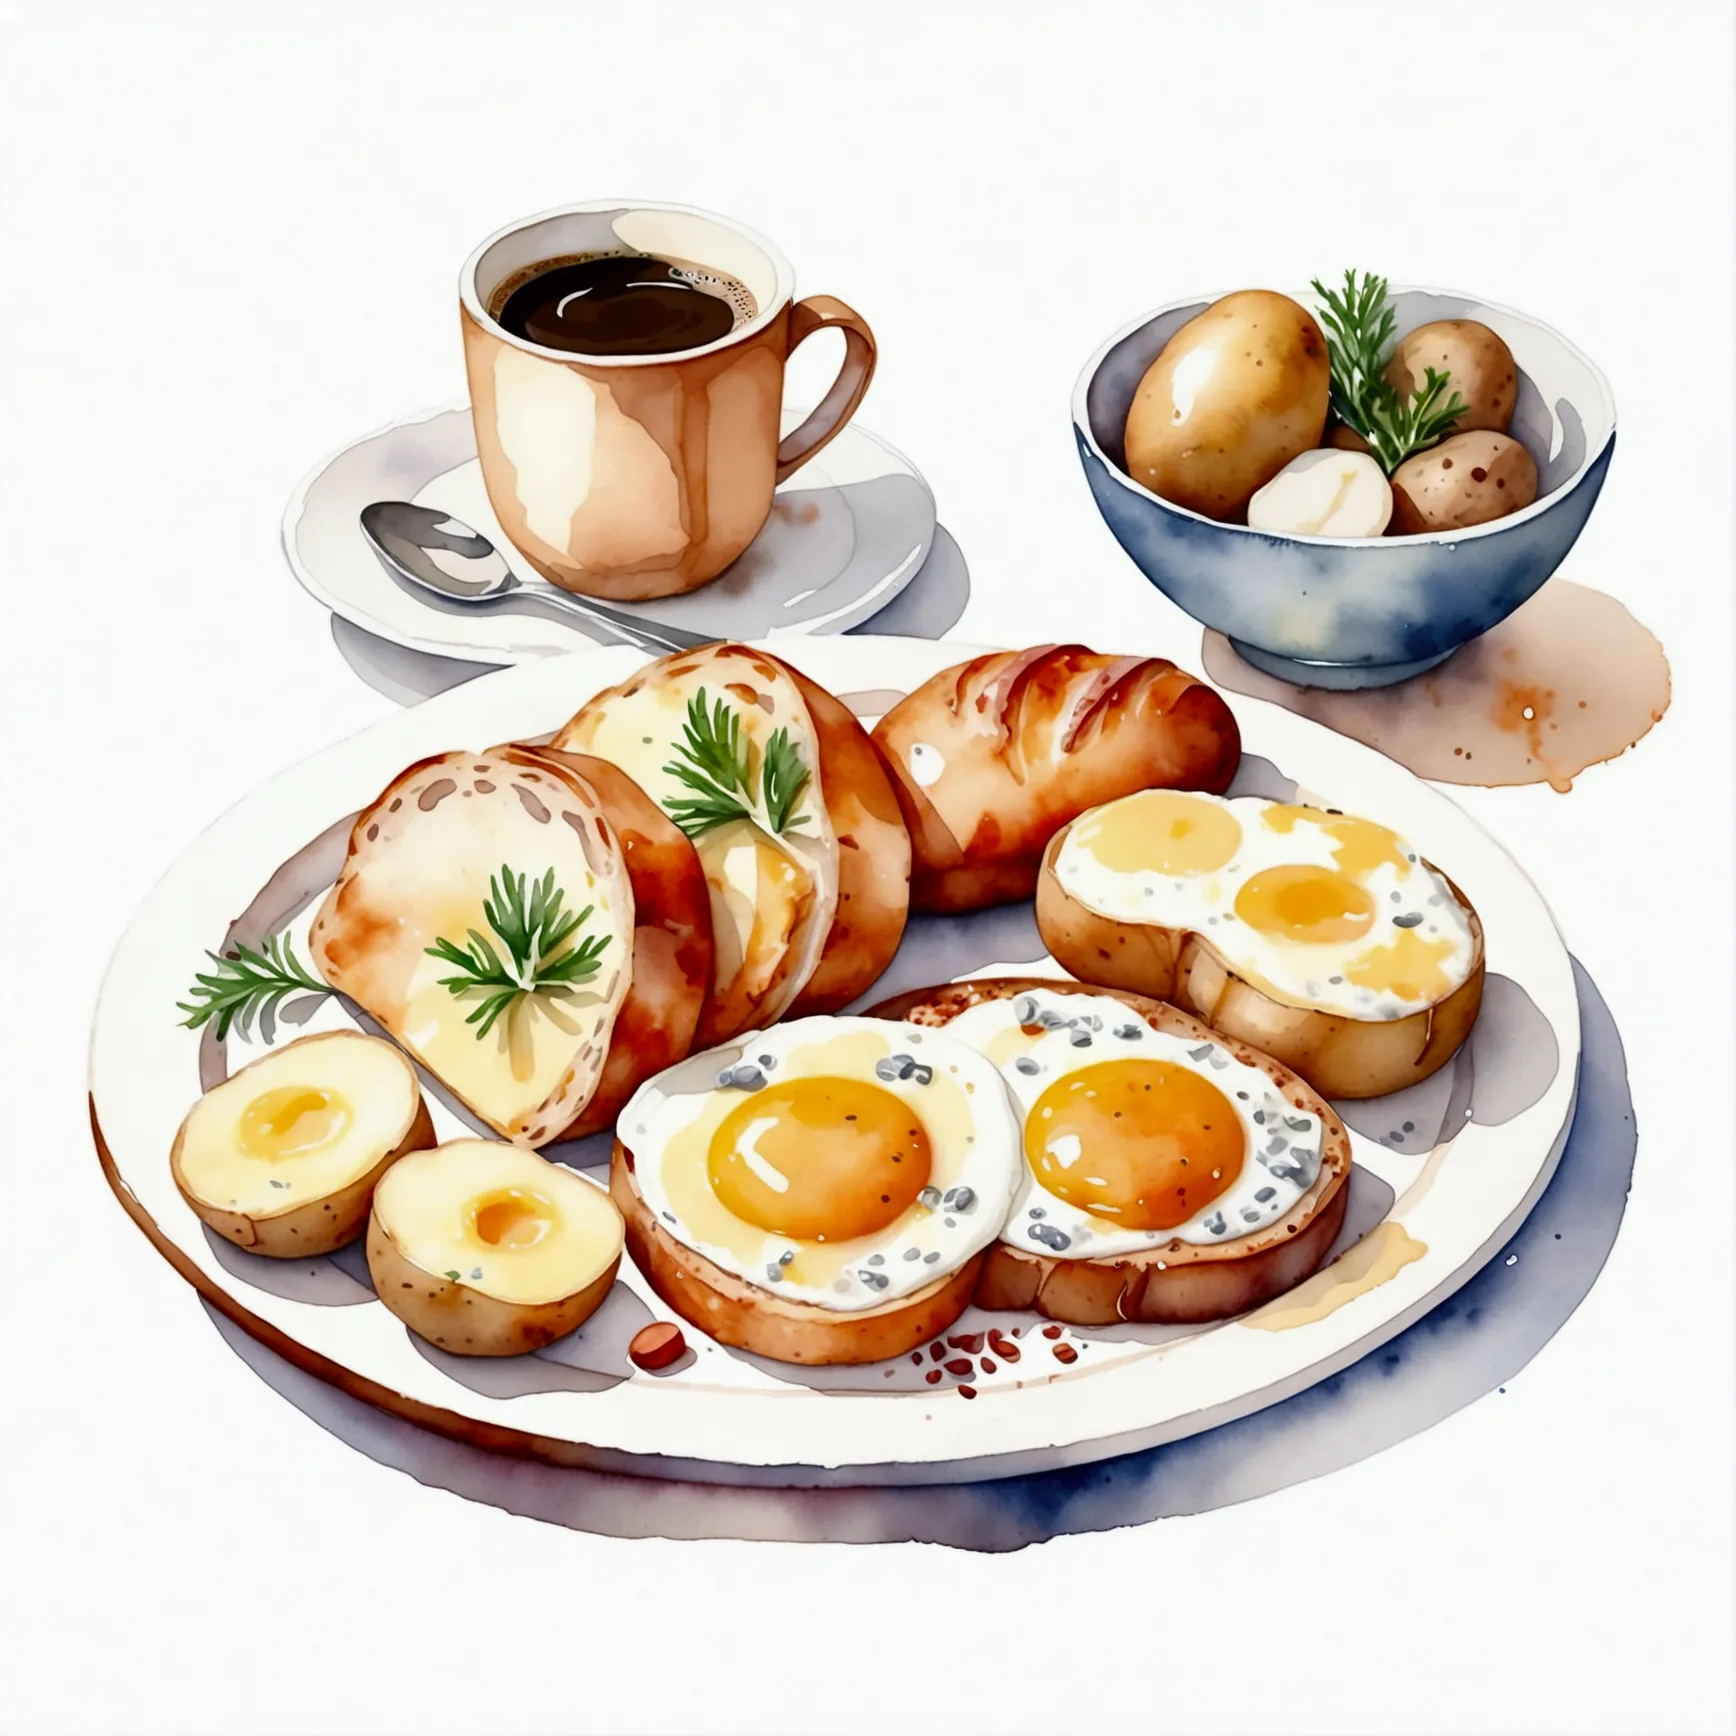 a very clean image painting of a full english breakfast menu, full dining set, three slices of potatoes, ((watercolor)), solid w...